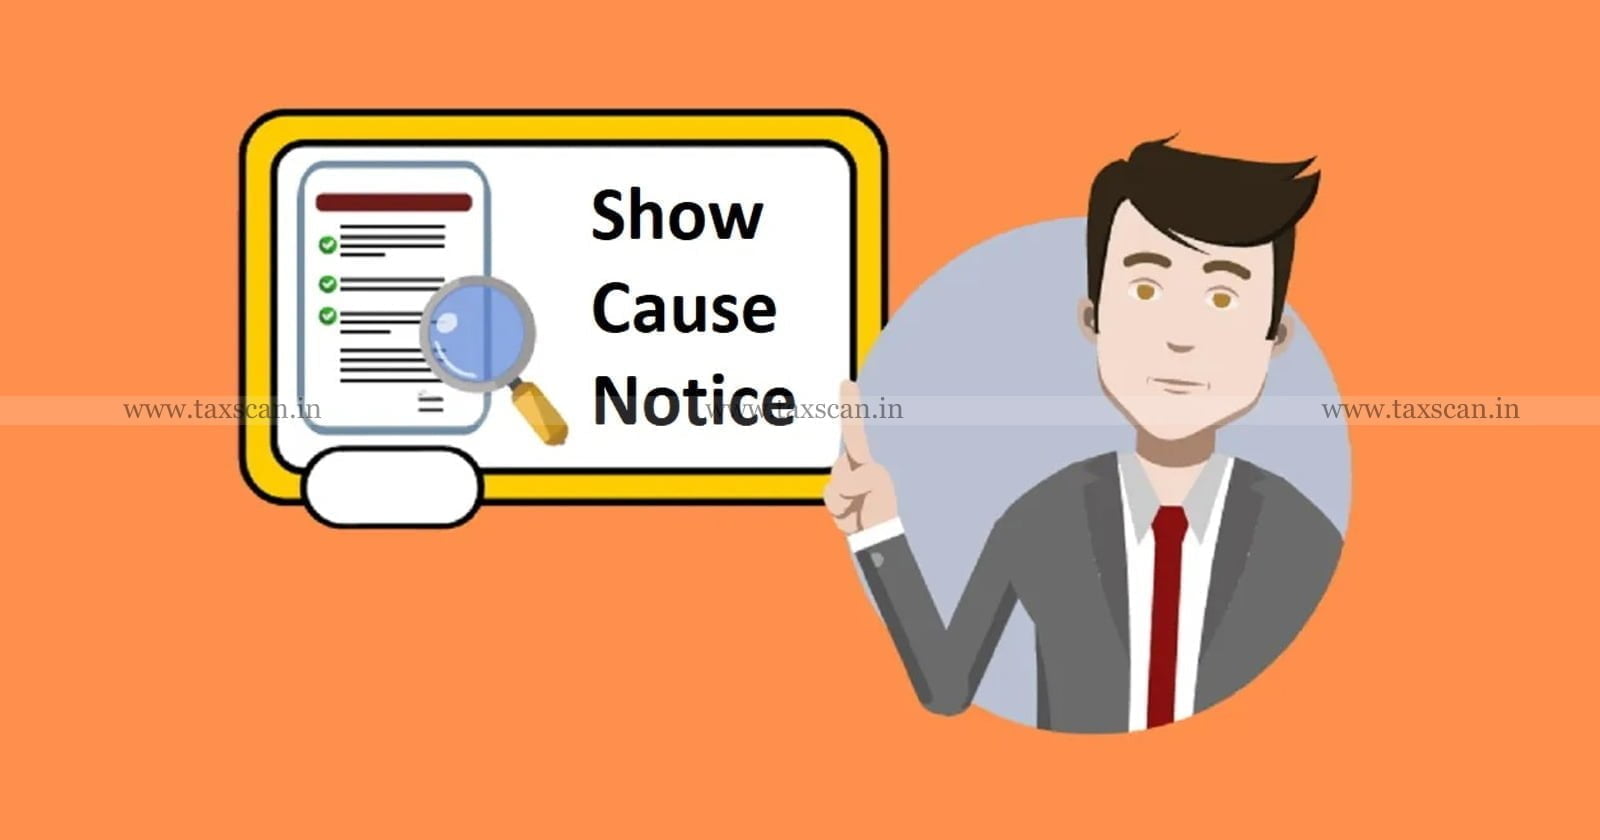 SCN - show cause notice reply - How to Reply to Show Cause Notice - SCN updates - SCN news - taxscan